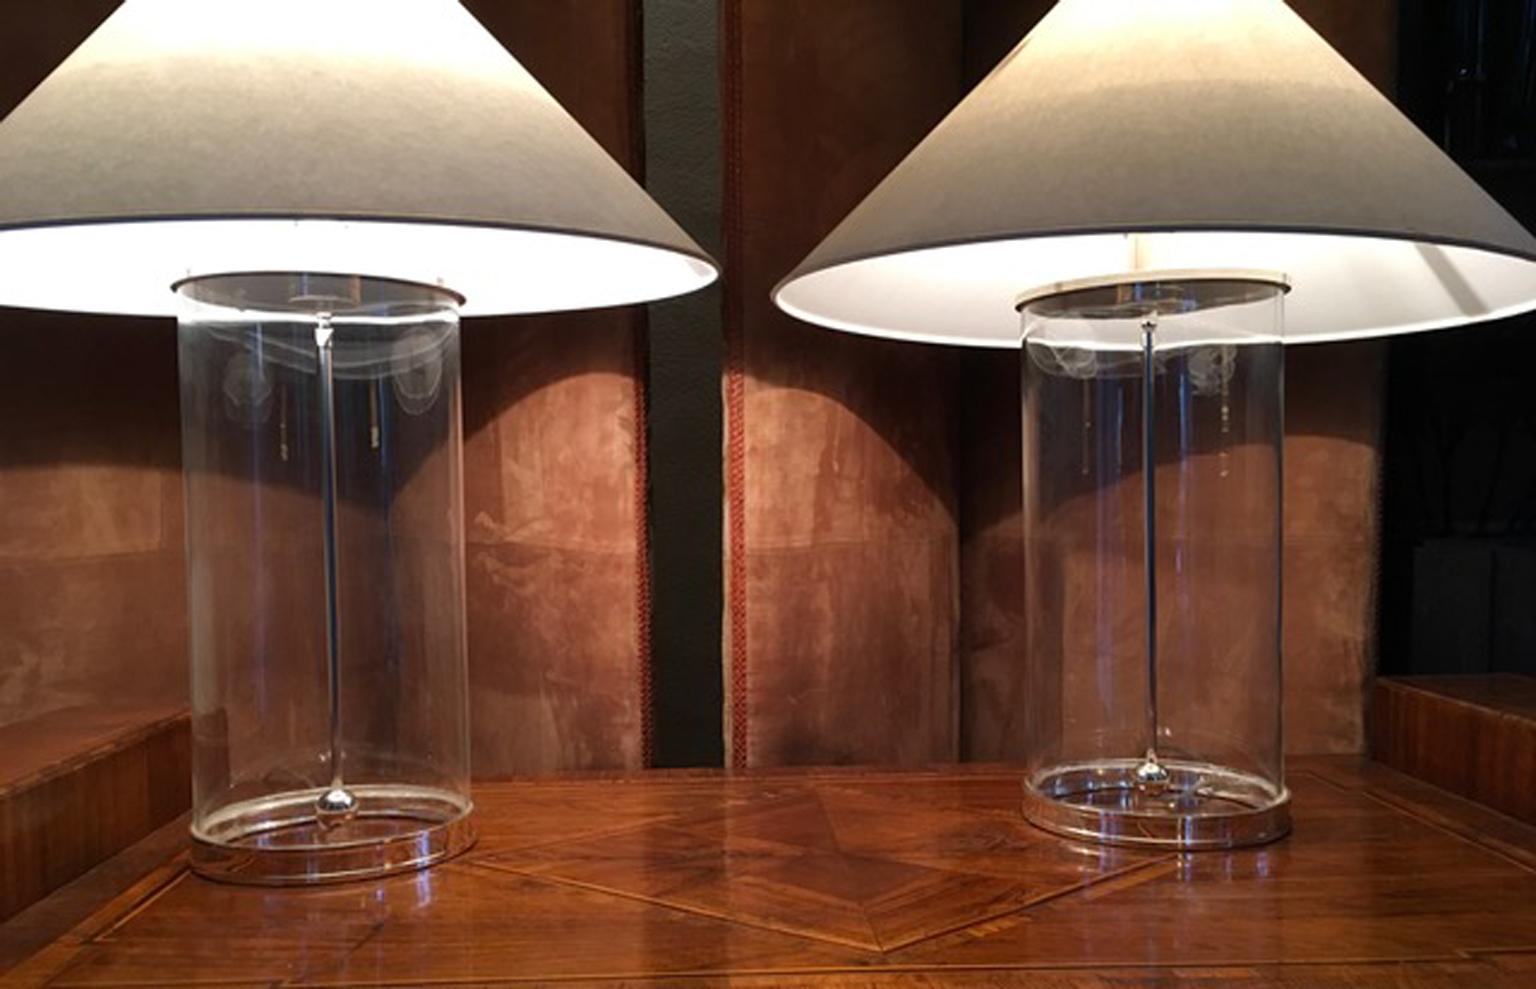 This pair of modern glass and polished silver table lamps, are part of the untimeless home collection by Ralph Lauren.
The shape of this model is perfect to put on the side tables in a living room, or an important console: they can't be ignored for